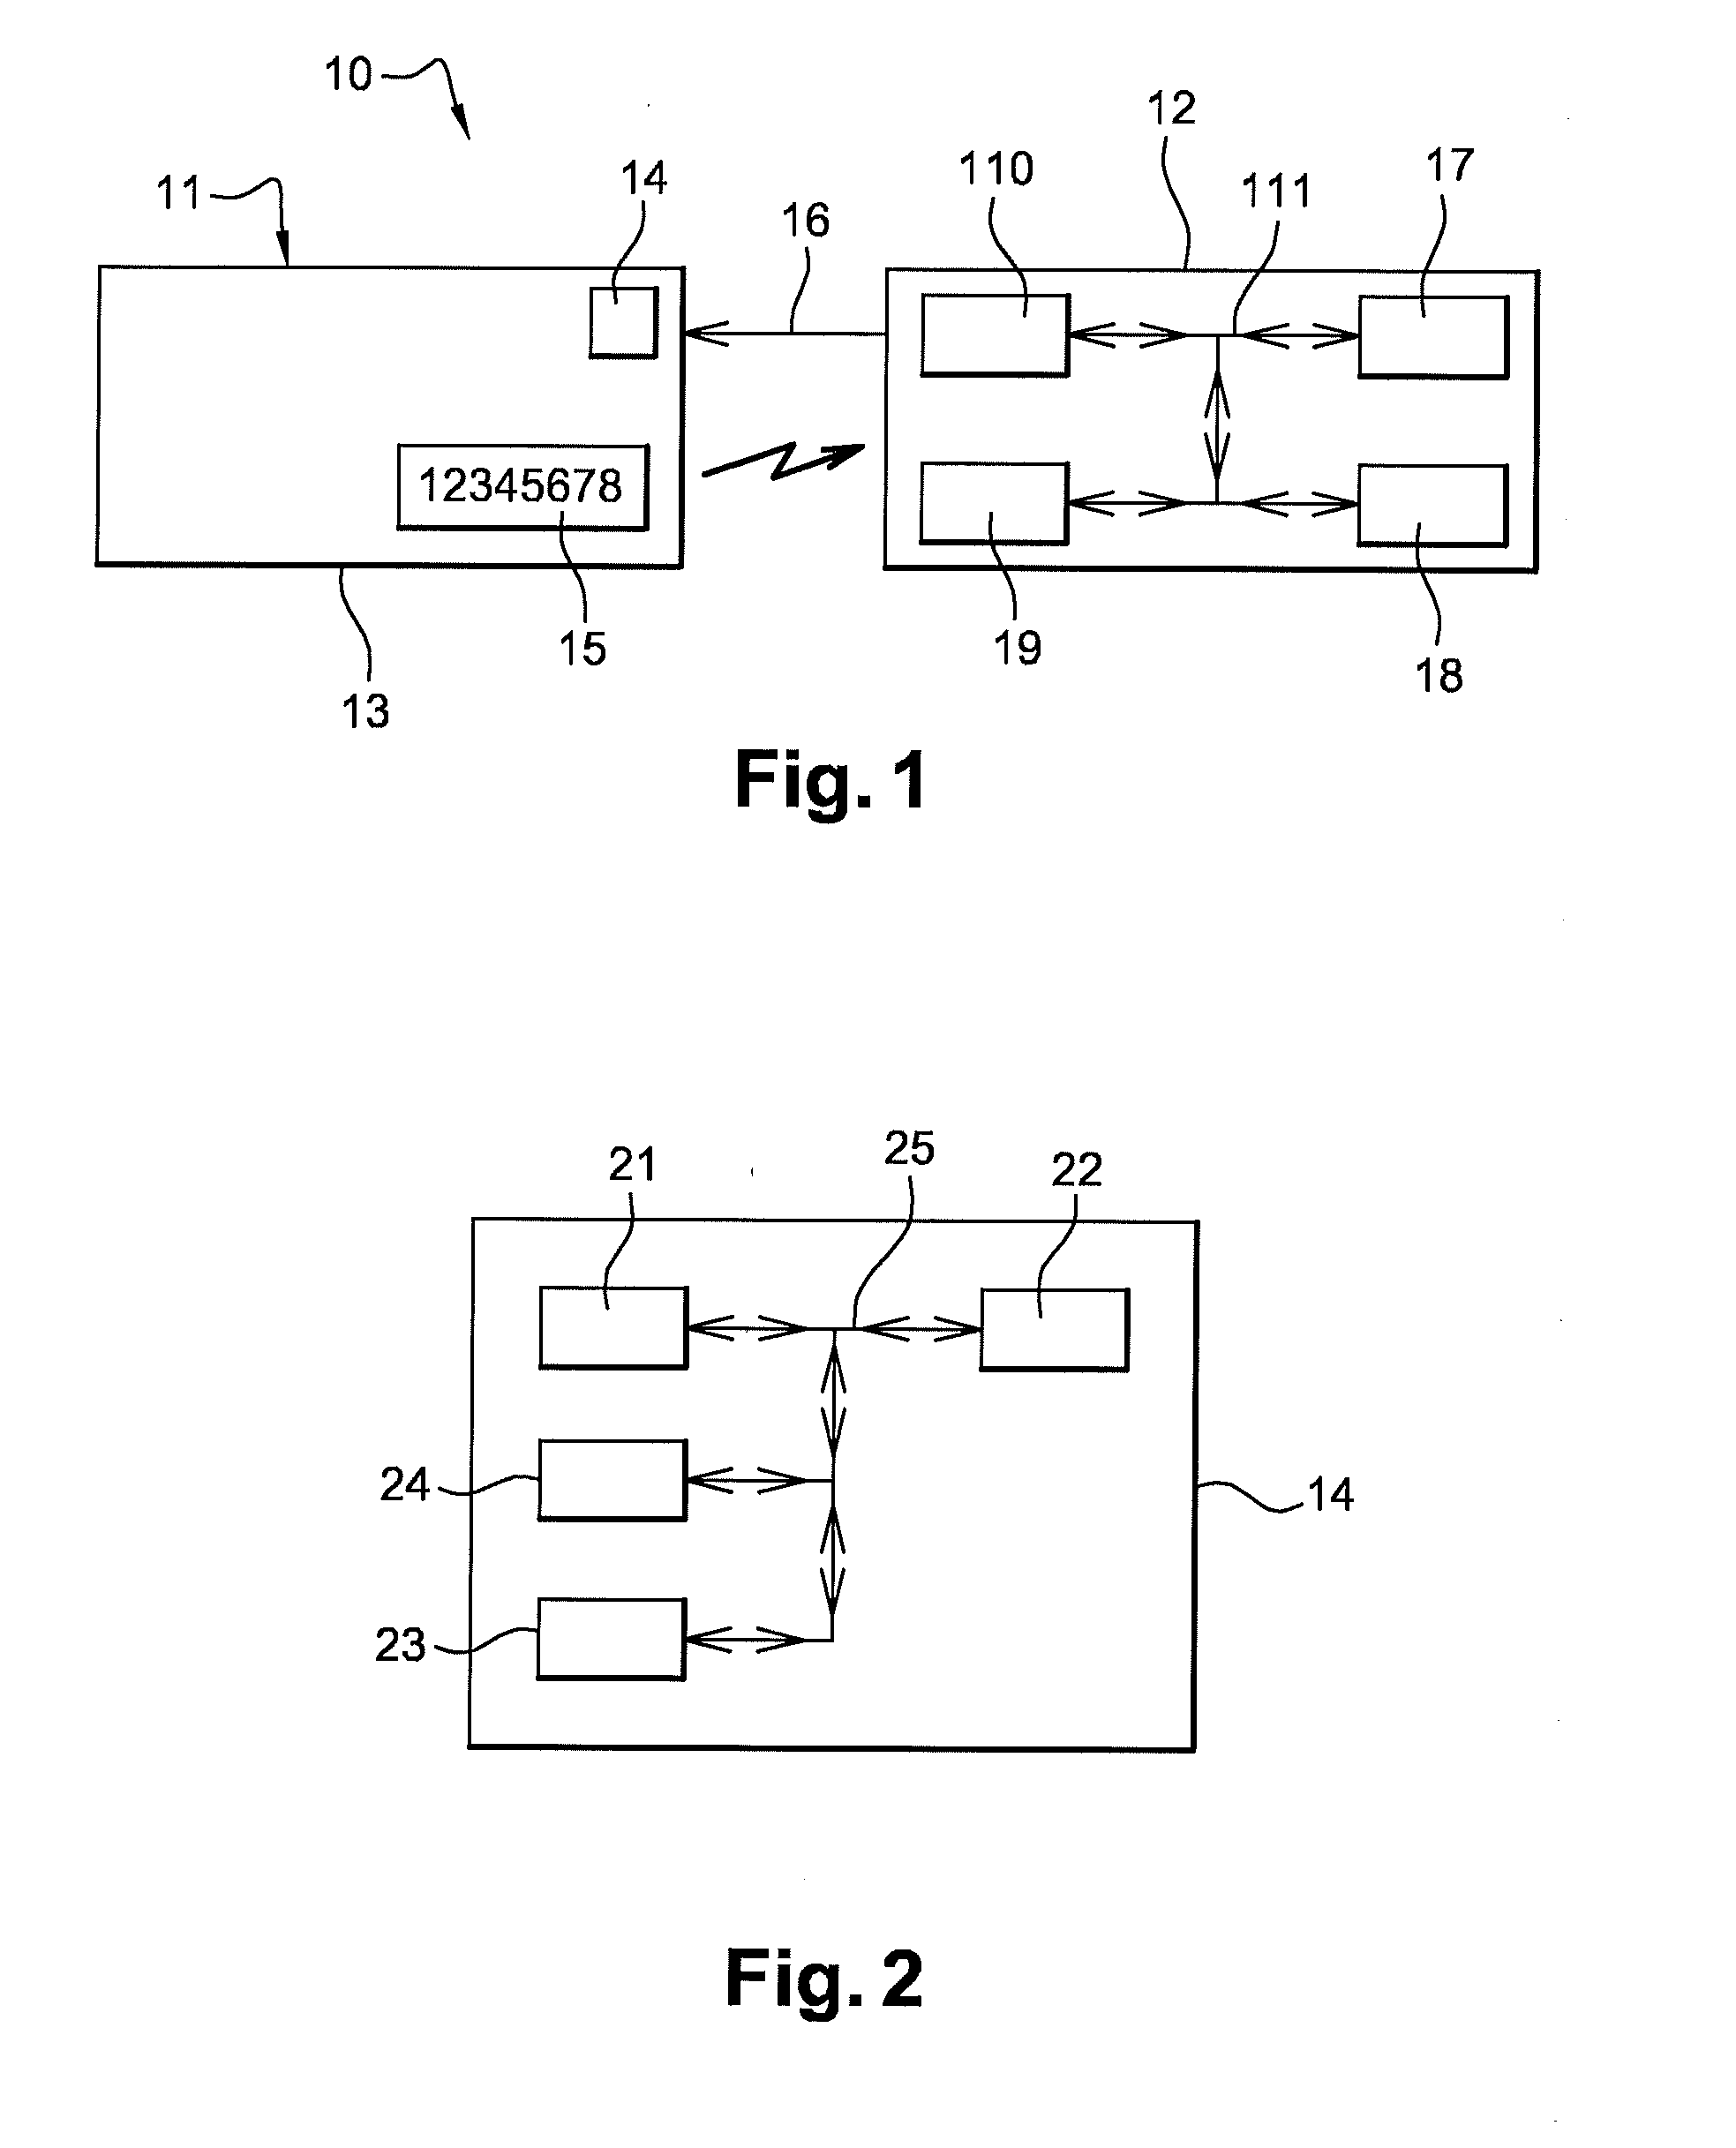 Method for authorising a communication with a portable electronic device, such as access to a memory zone, corresponding electronic device and system